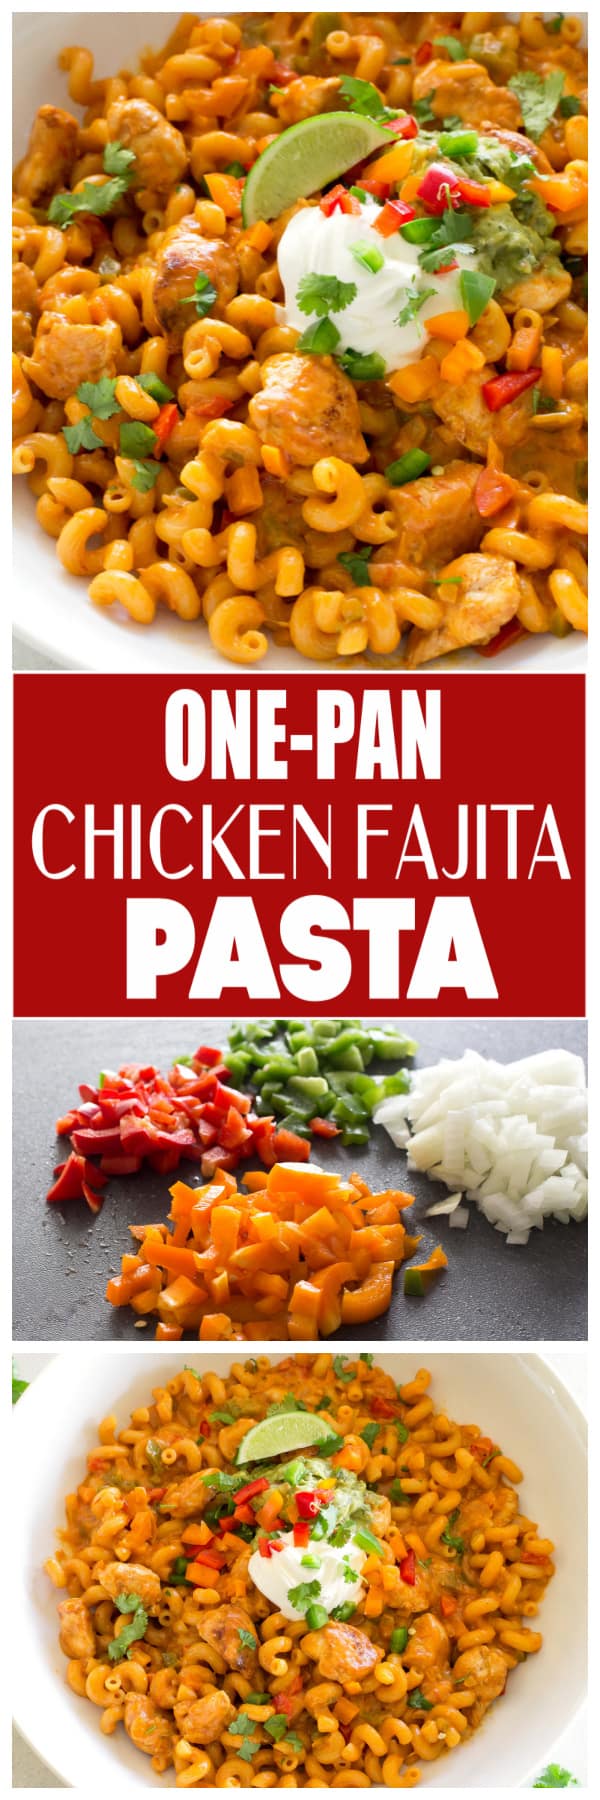 One-Pan Chicken Fajita Pasta is an easy Mexican chicken recipe that you can make on a busy weeknight. Seasoned chicken and fresh bell peppers in a creamy pasta make for a delicious dinner! #chicken #recipe #dinner #Mexican #onepan